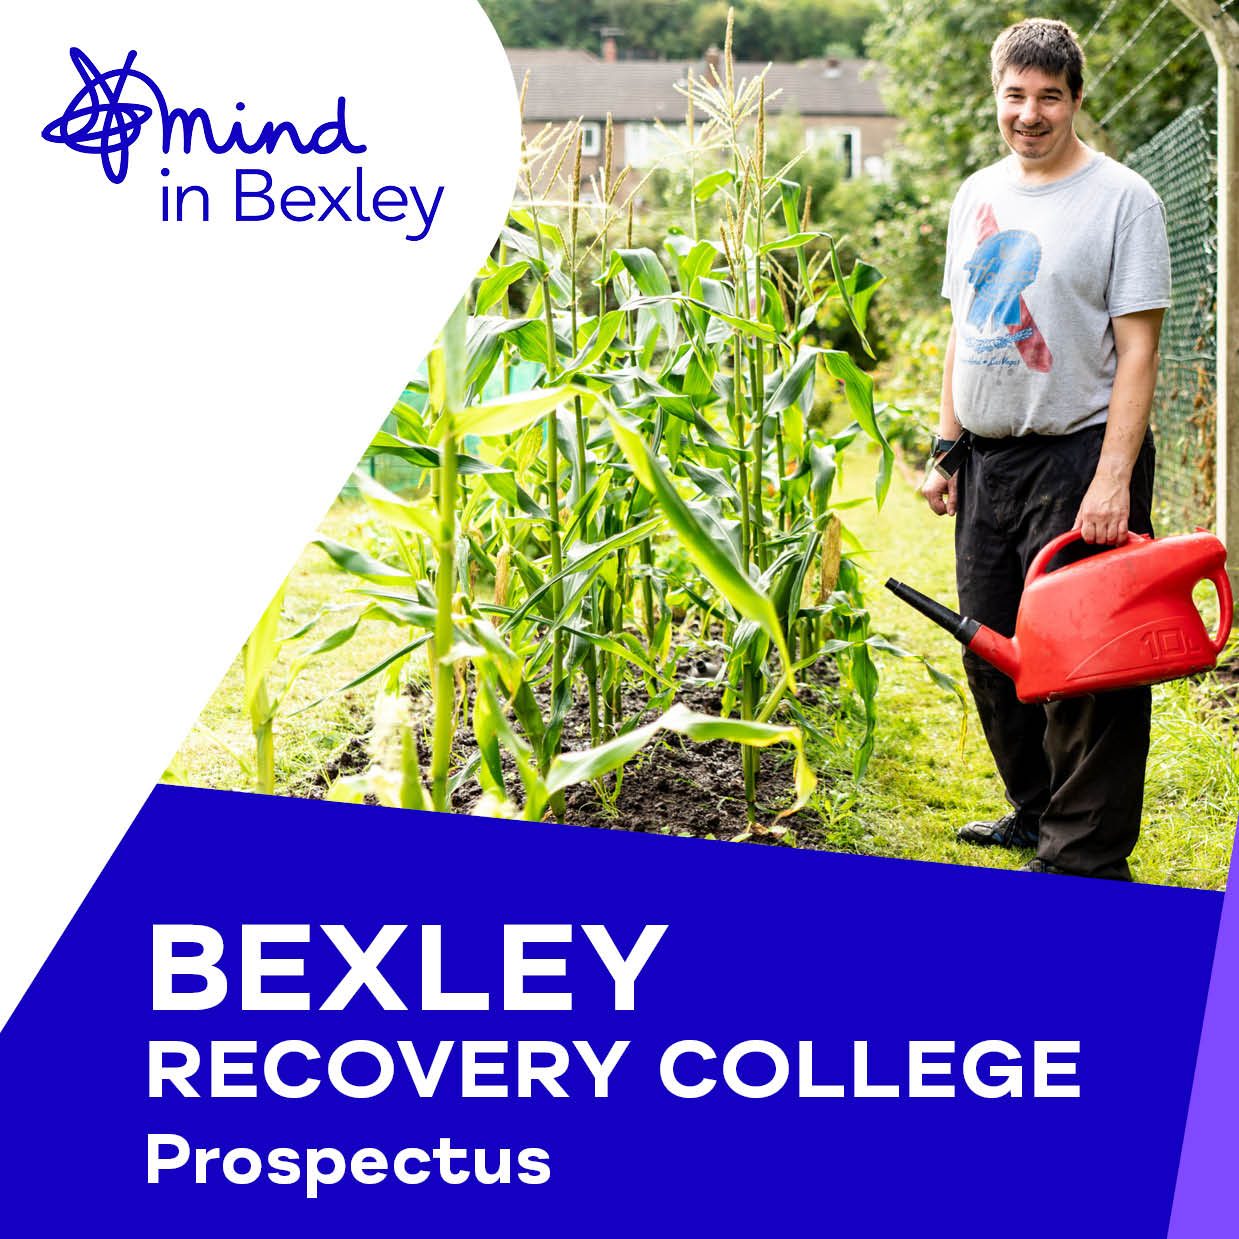 The front cover of the July to September Mind in Bexley Recovery College Prospectus